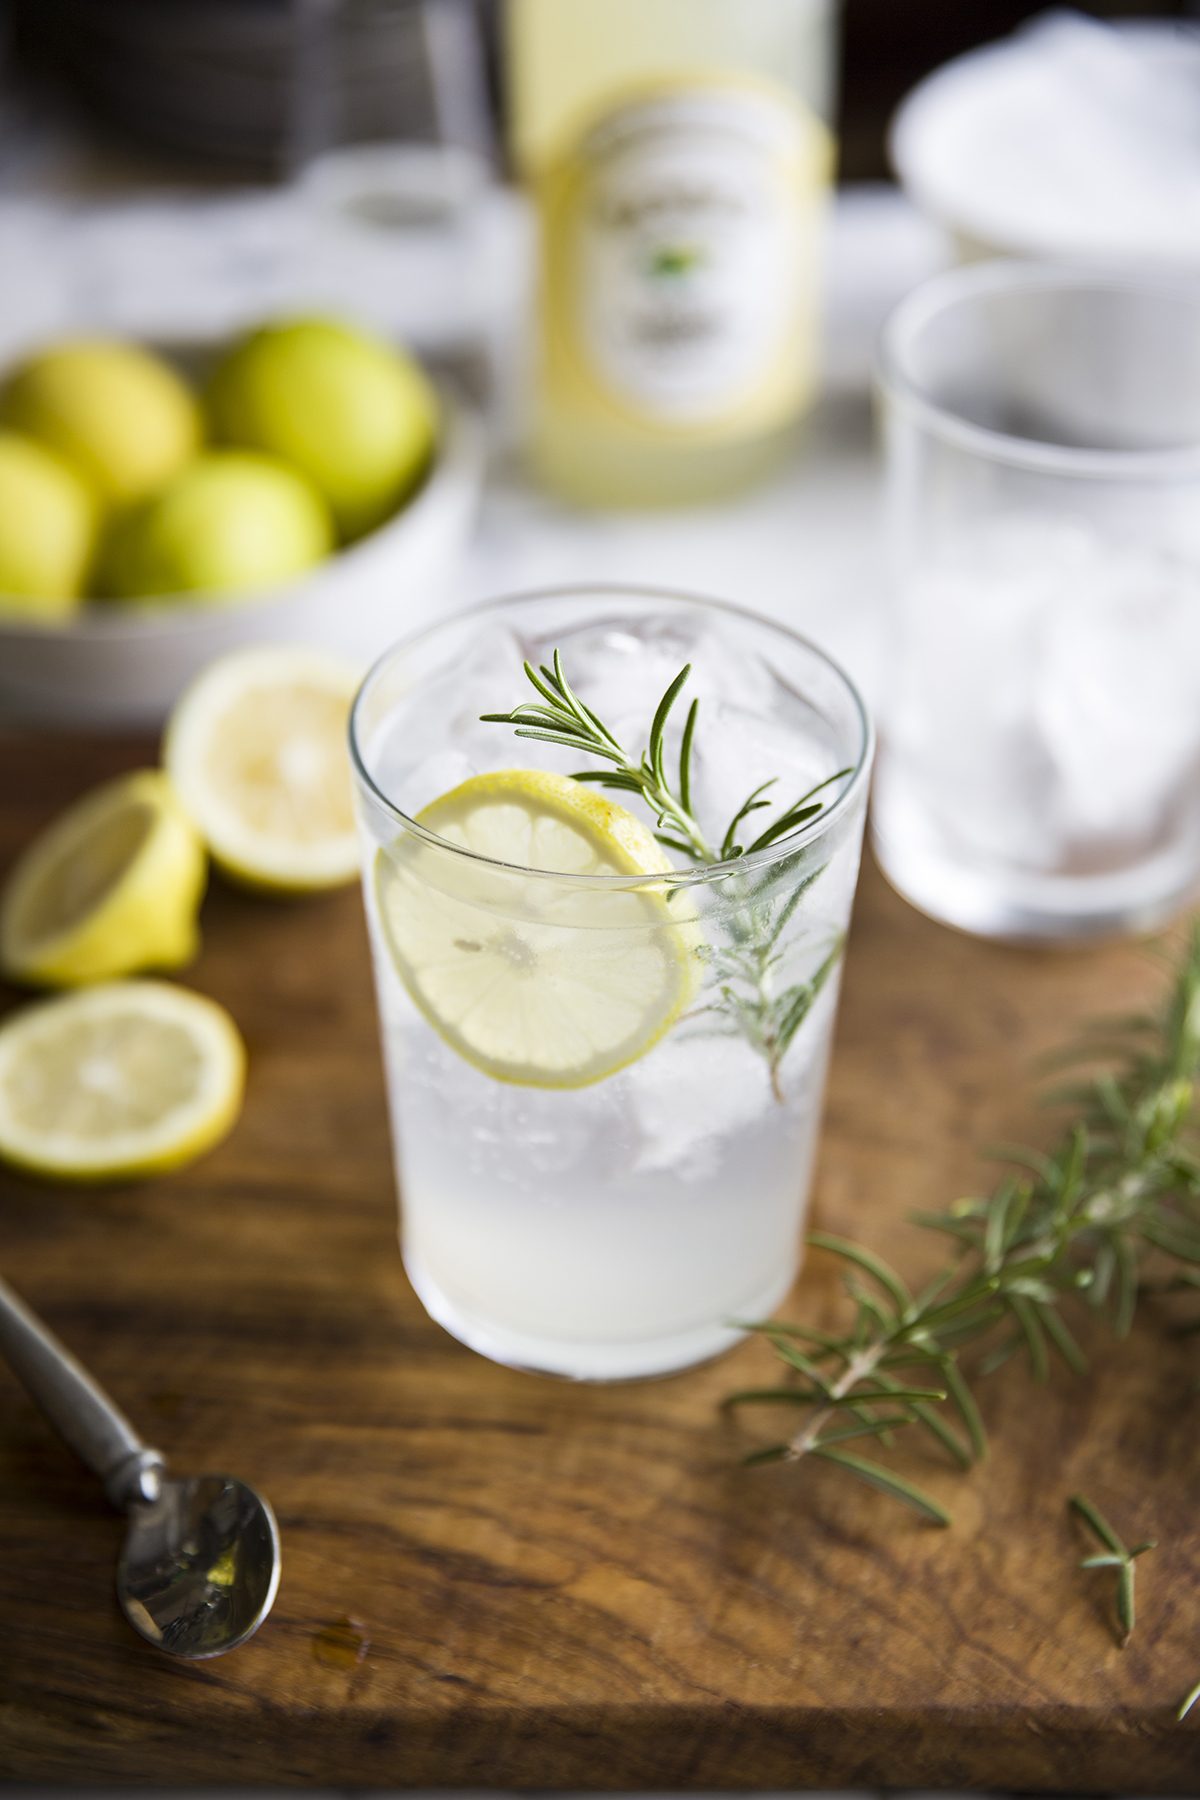 Gin & tonic with lemon cordial & rosemary